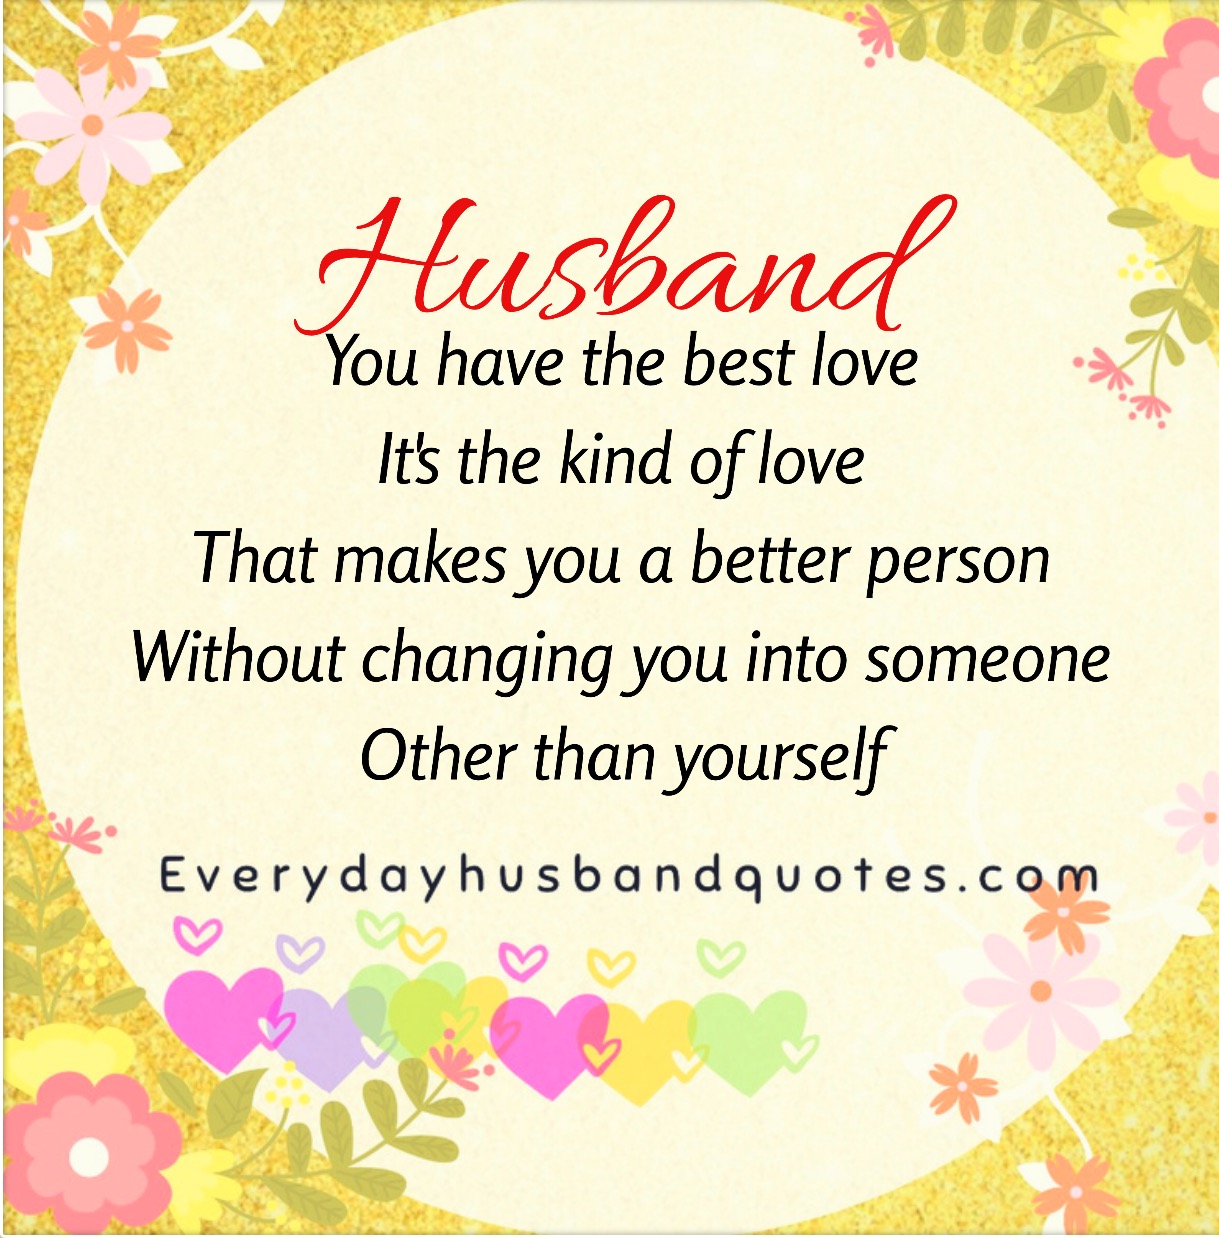 Everyday Husband Quotes.com...Yes! Marriage Still Works